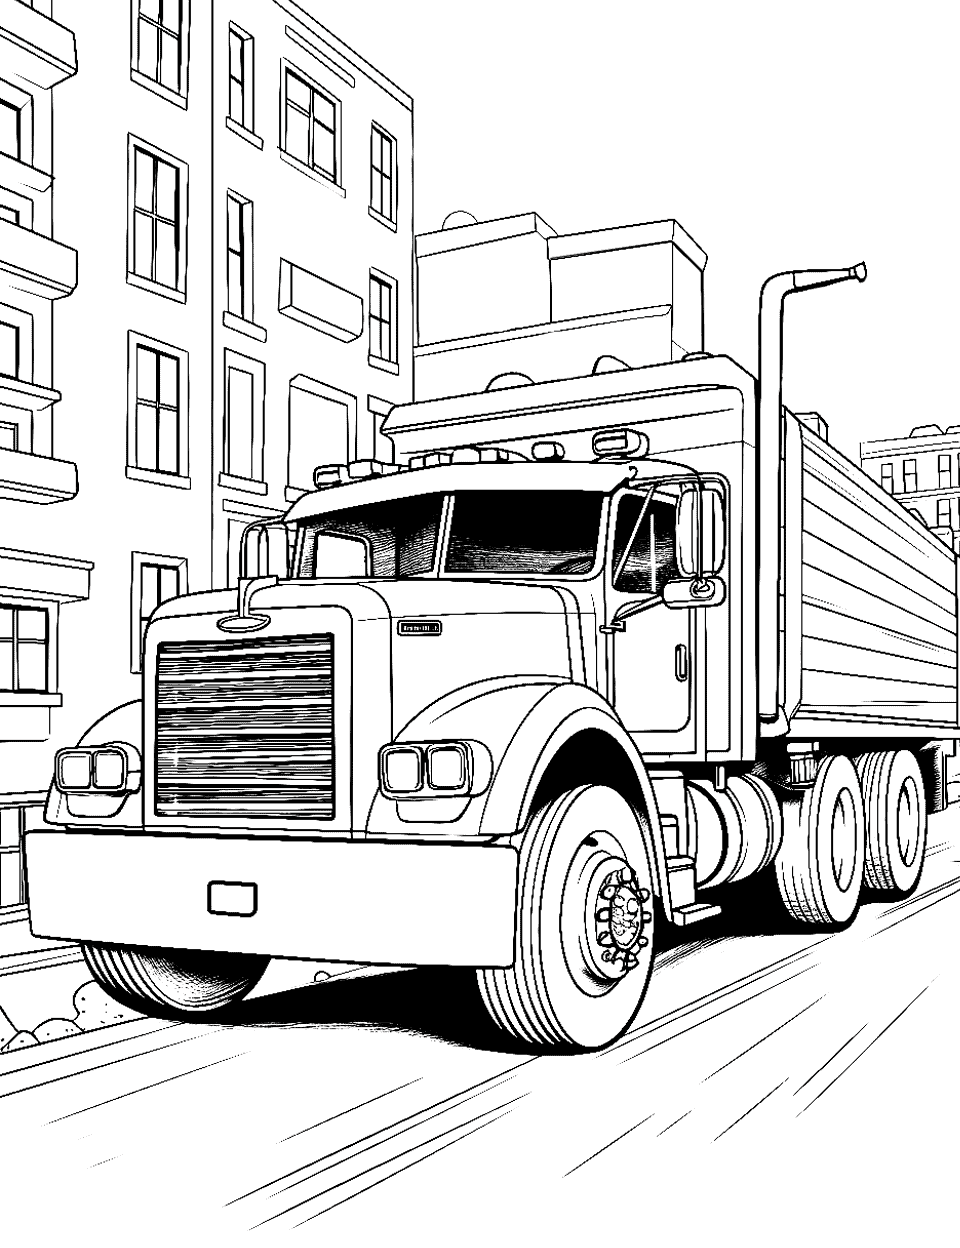 Semi Truck in the City Coloring Page - A semi-truck driving through a city street with tall buildings around